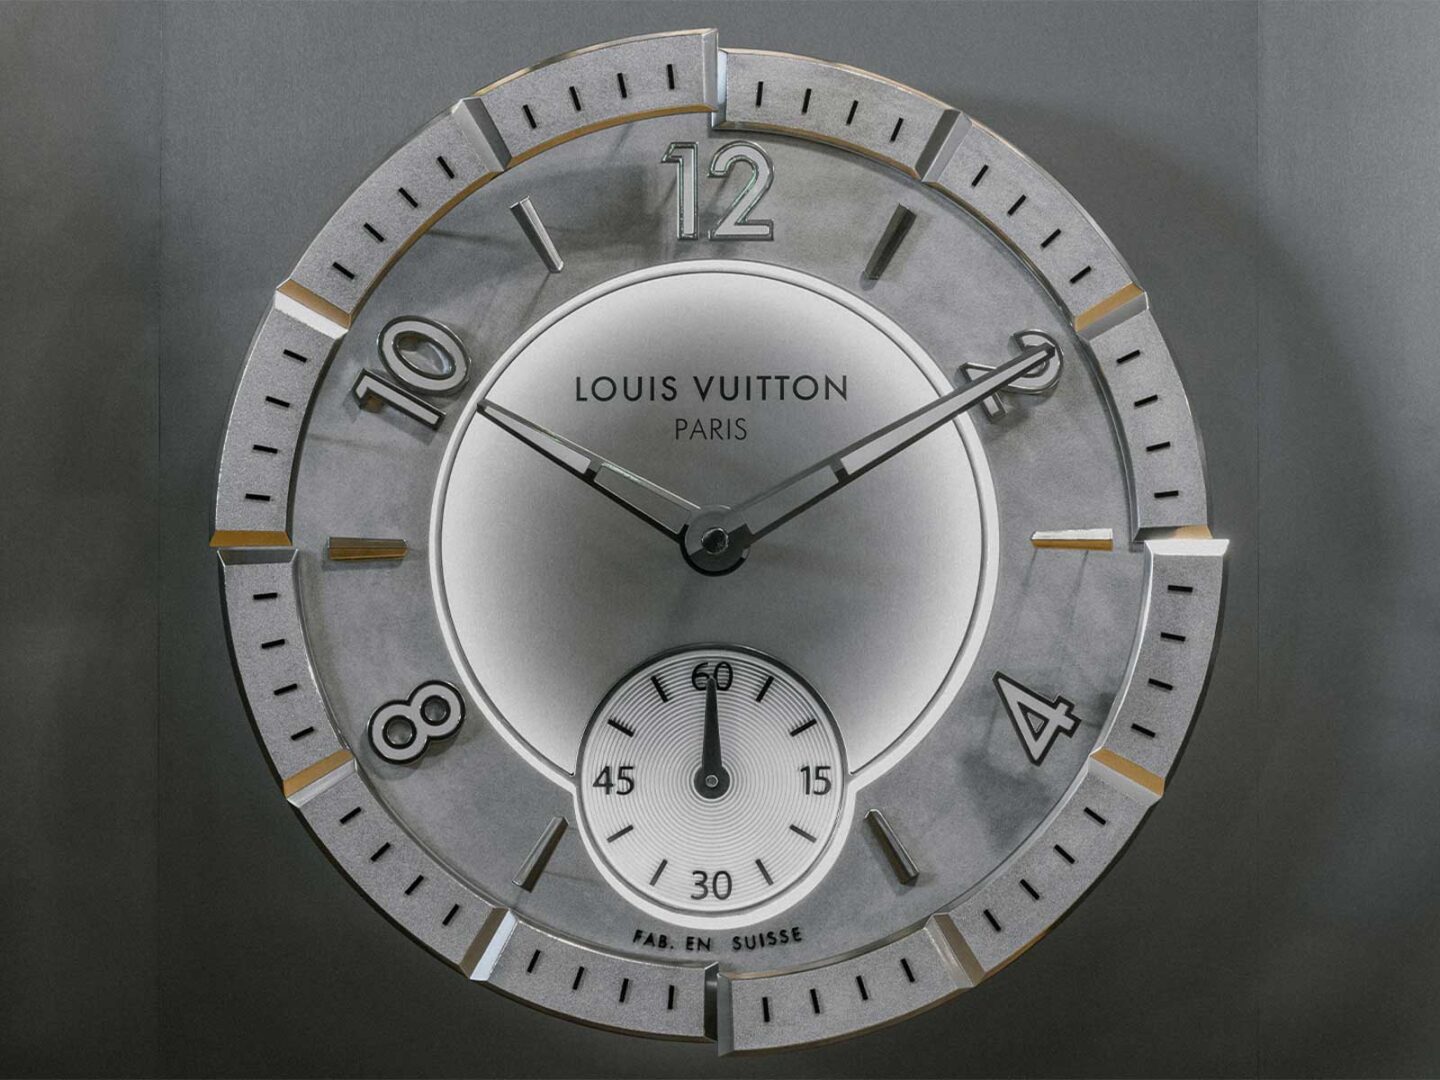 History Of Louis Vuitton Watches